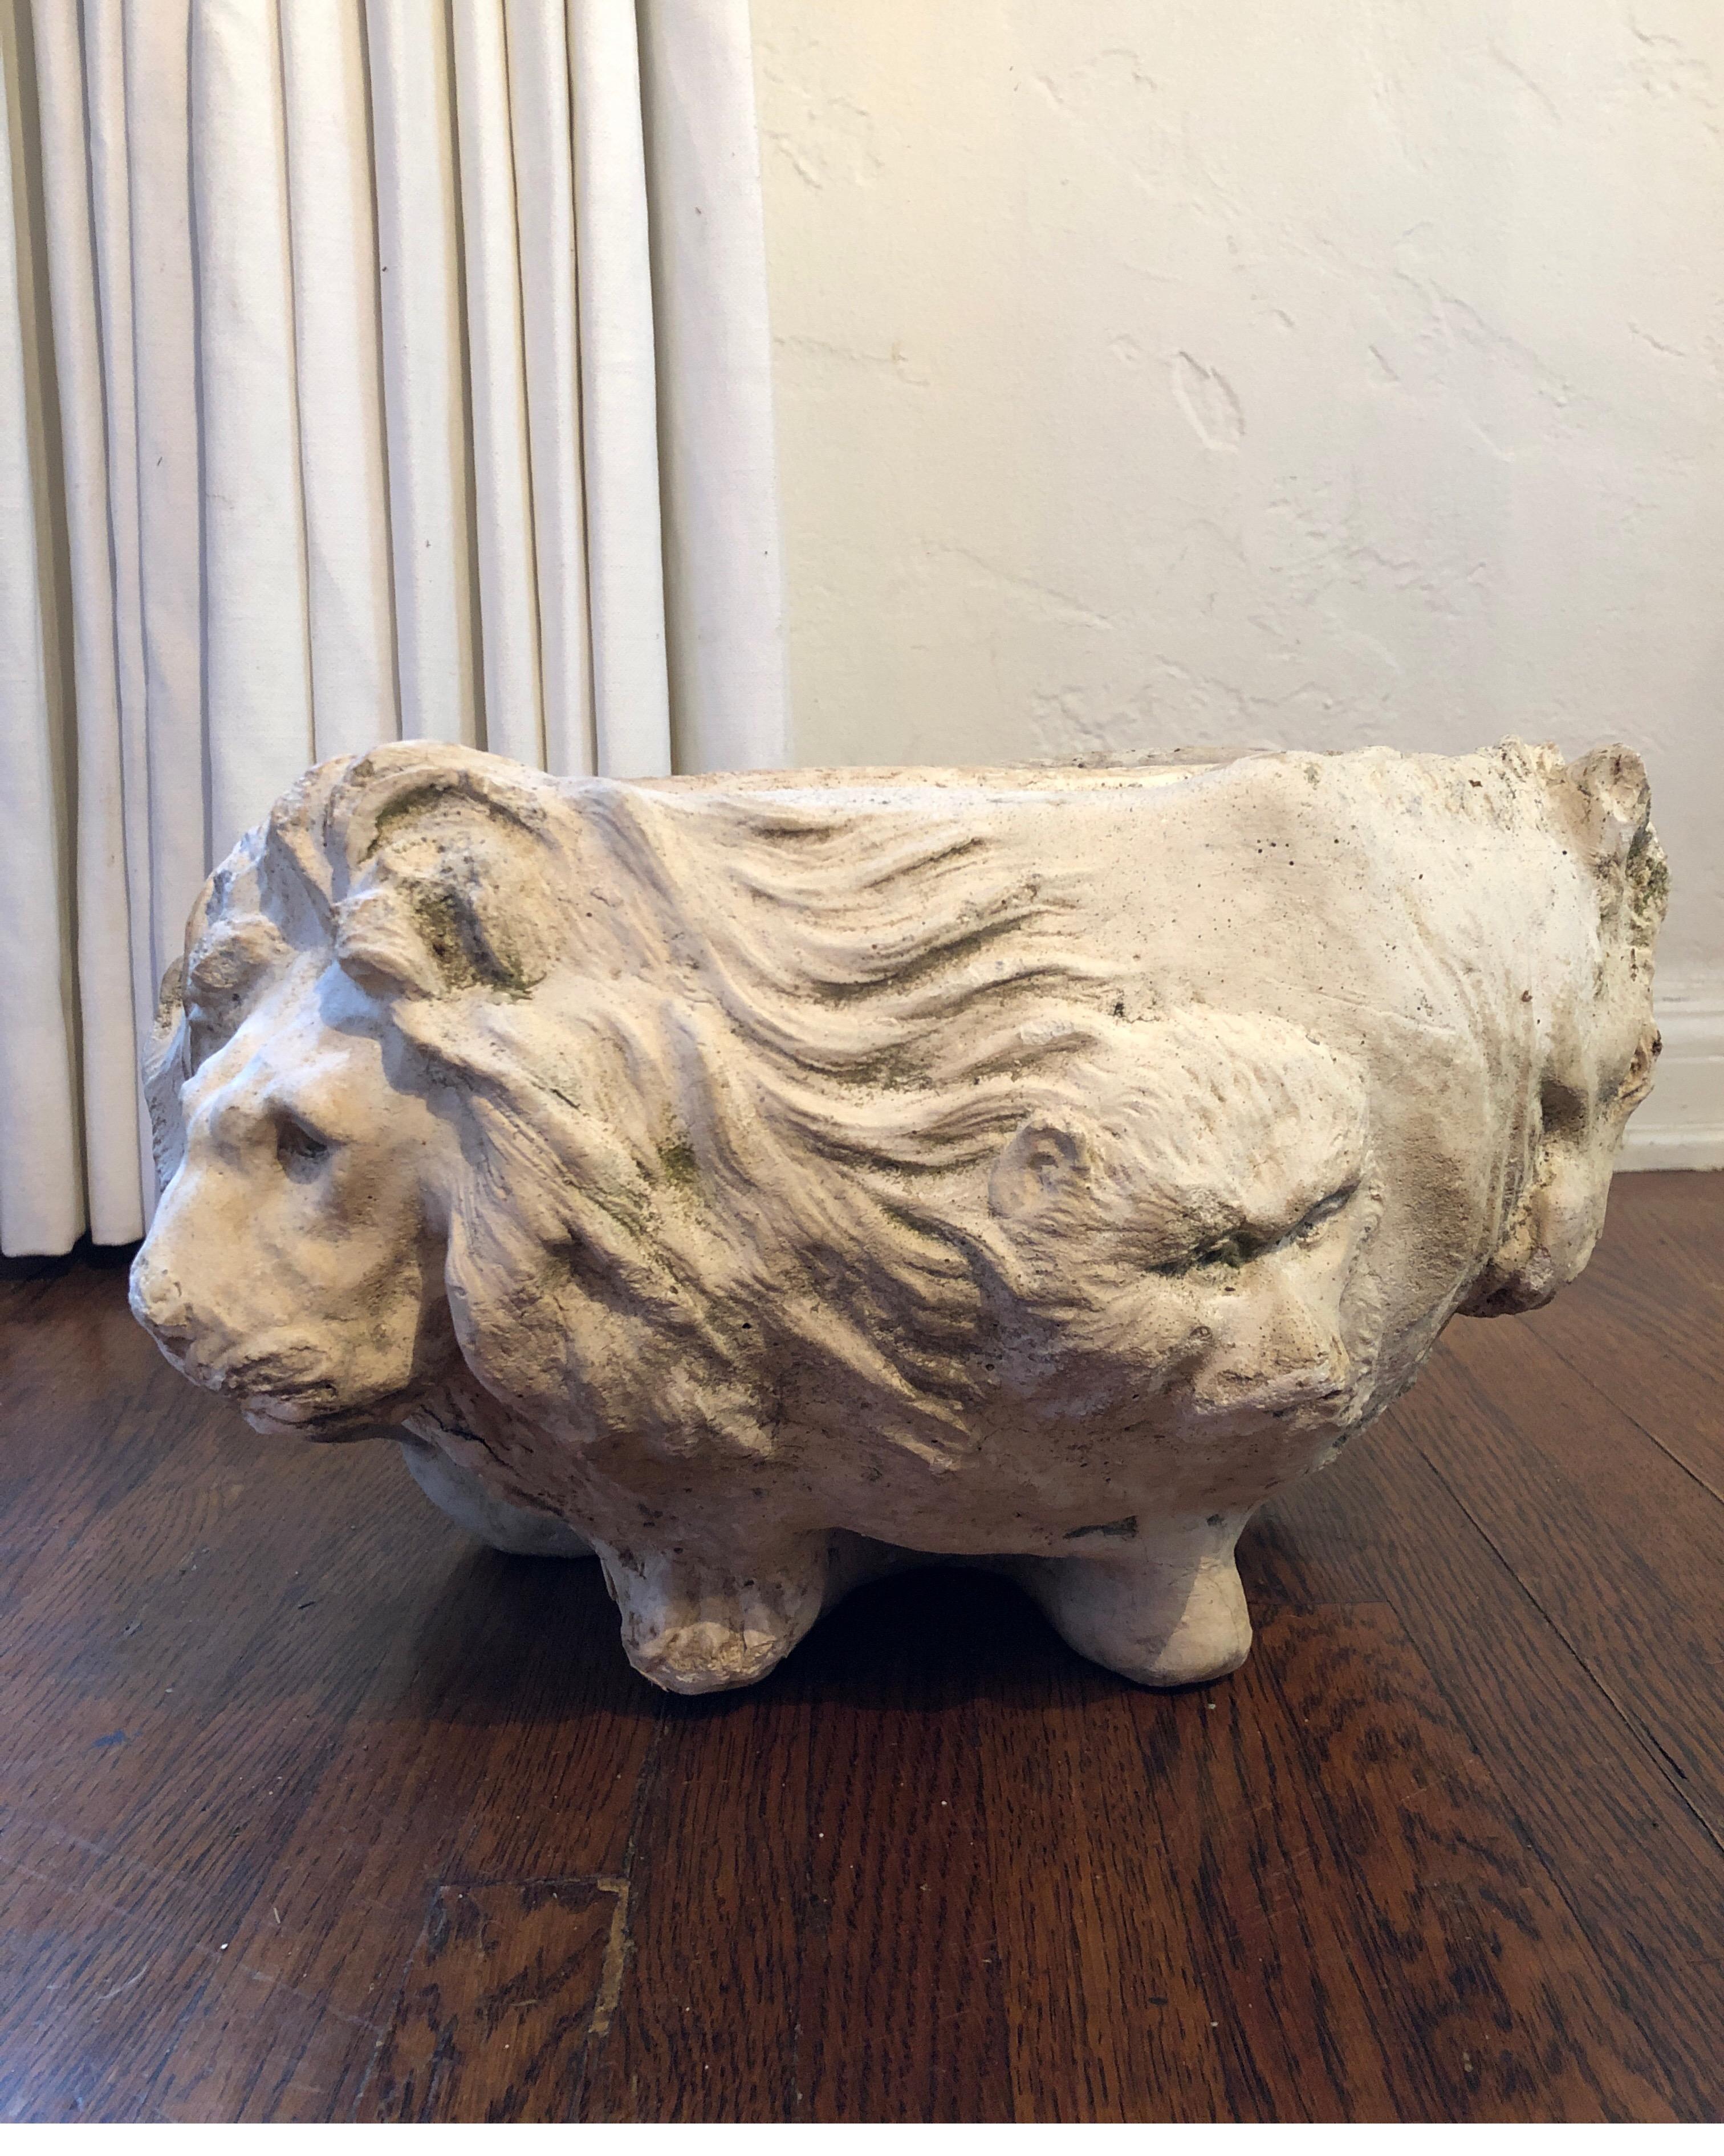 Unique carved stone planter with lion face as well as elephant, tiger and other animals. See pics.
Base has carved legs to raise it a bit off the ground, 19th century.

Wear consistent with age. See pics.